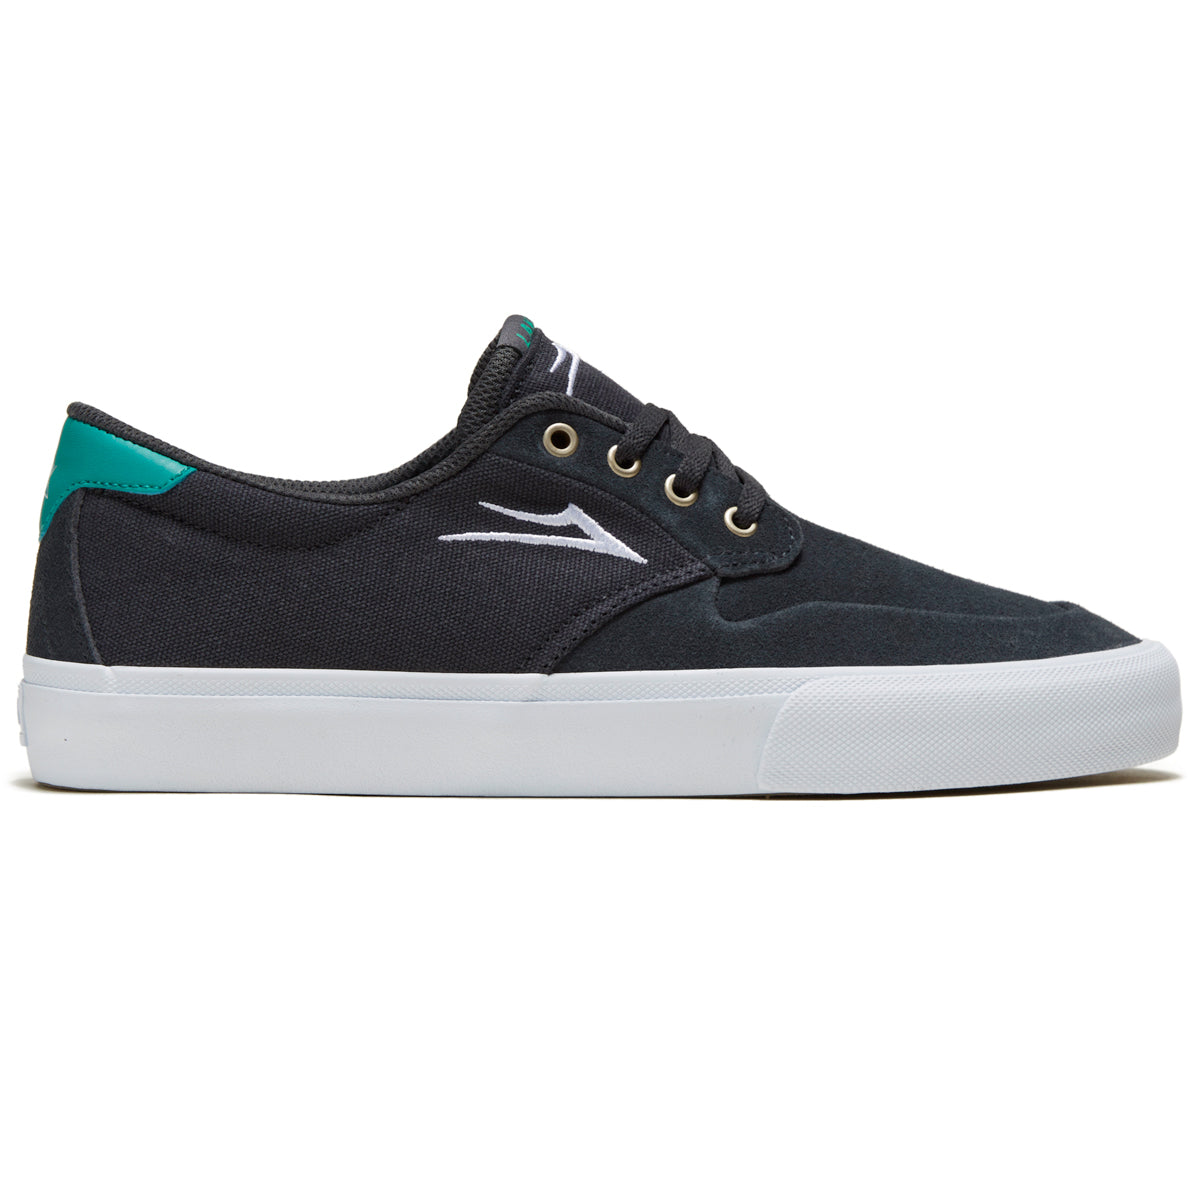 Lakai Riley 3 Shoes - Charcoal Suede image 1